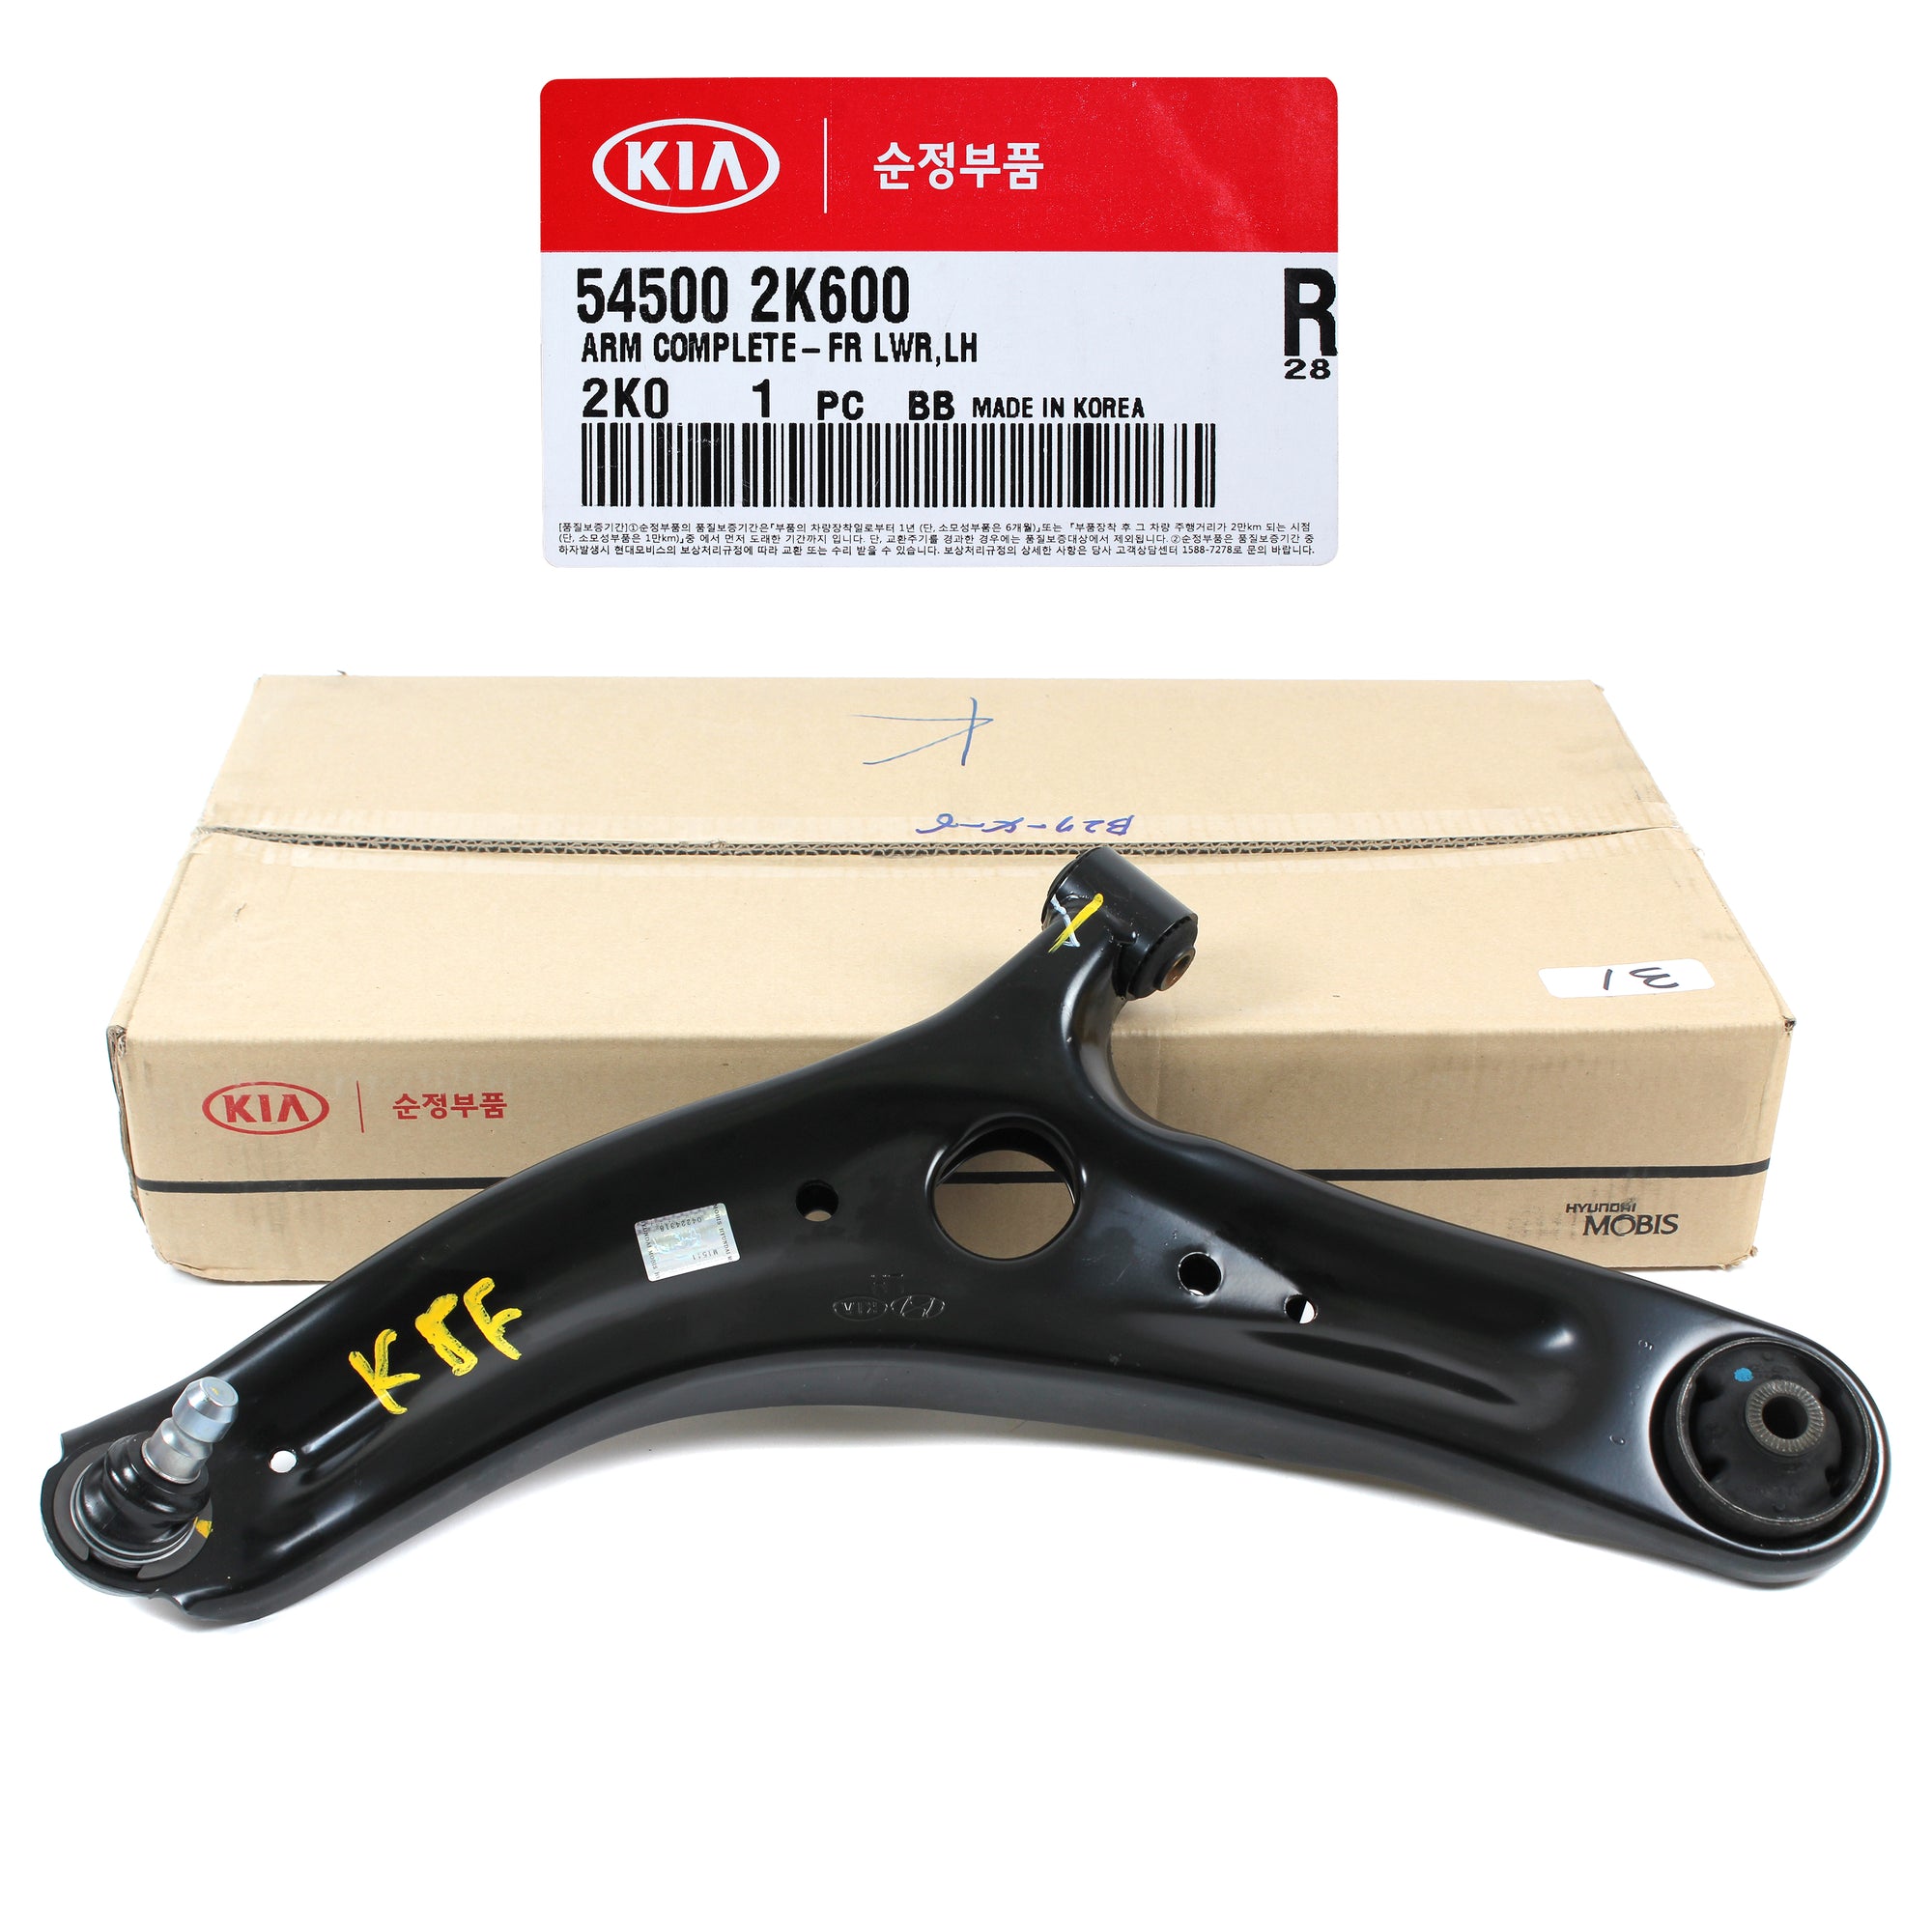 GENUINE Lower Control Arm FRONT LEFT DRIVER for 2010-2013 Kia Soul 545002K600